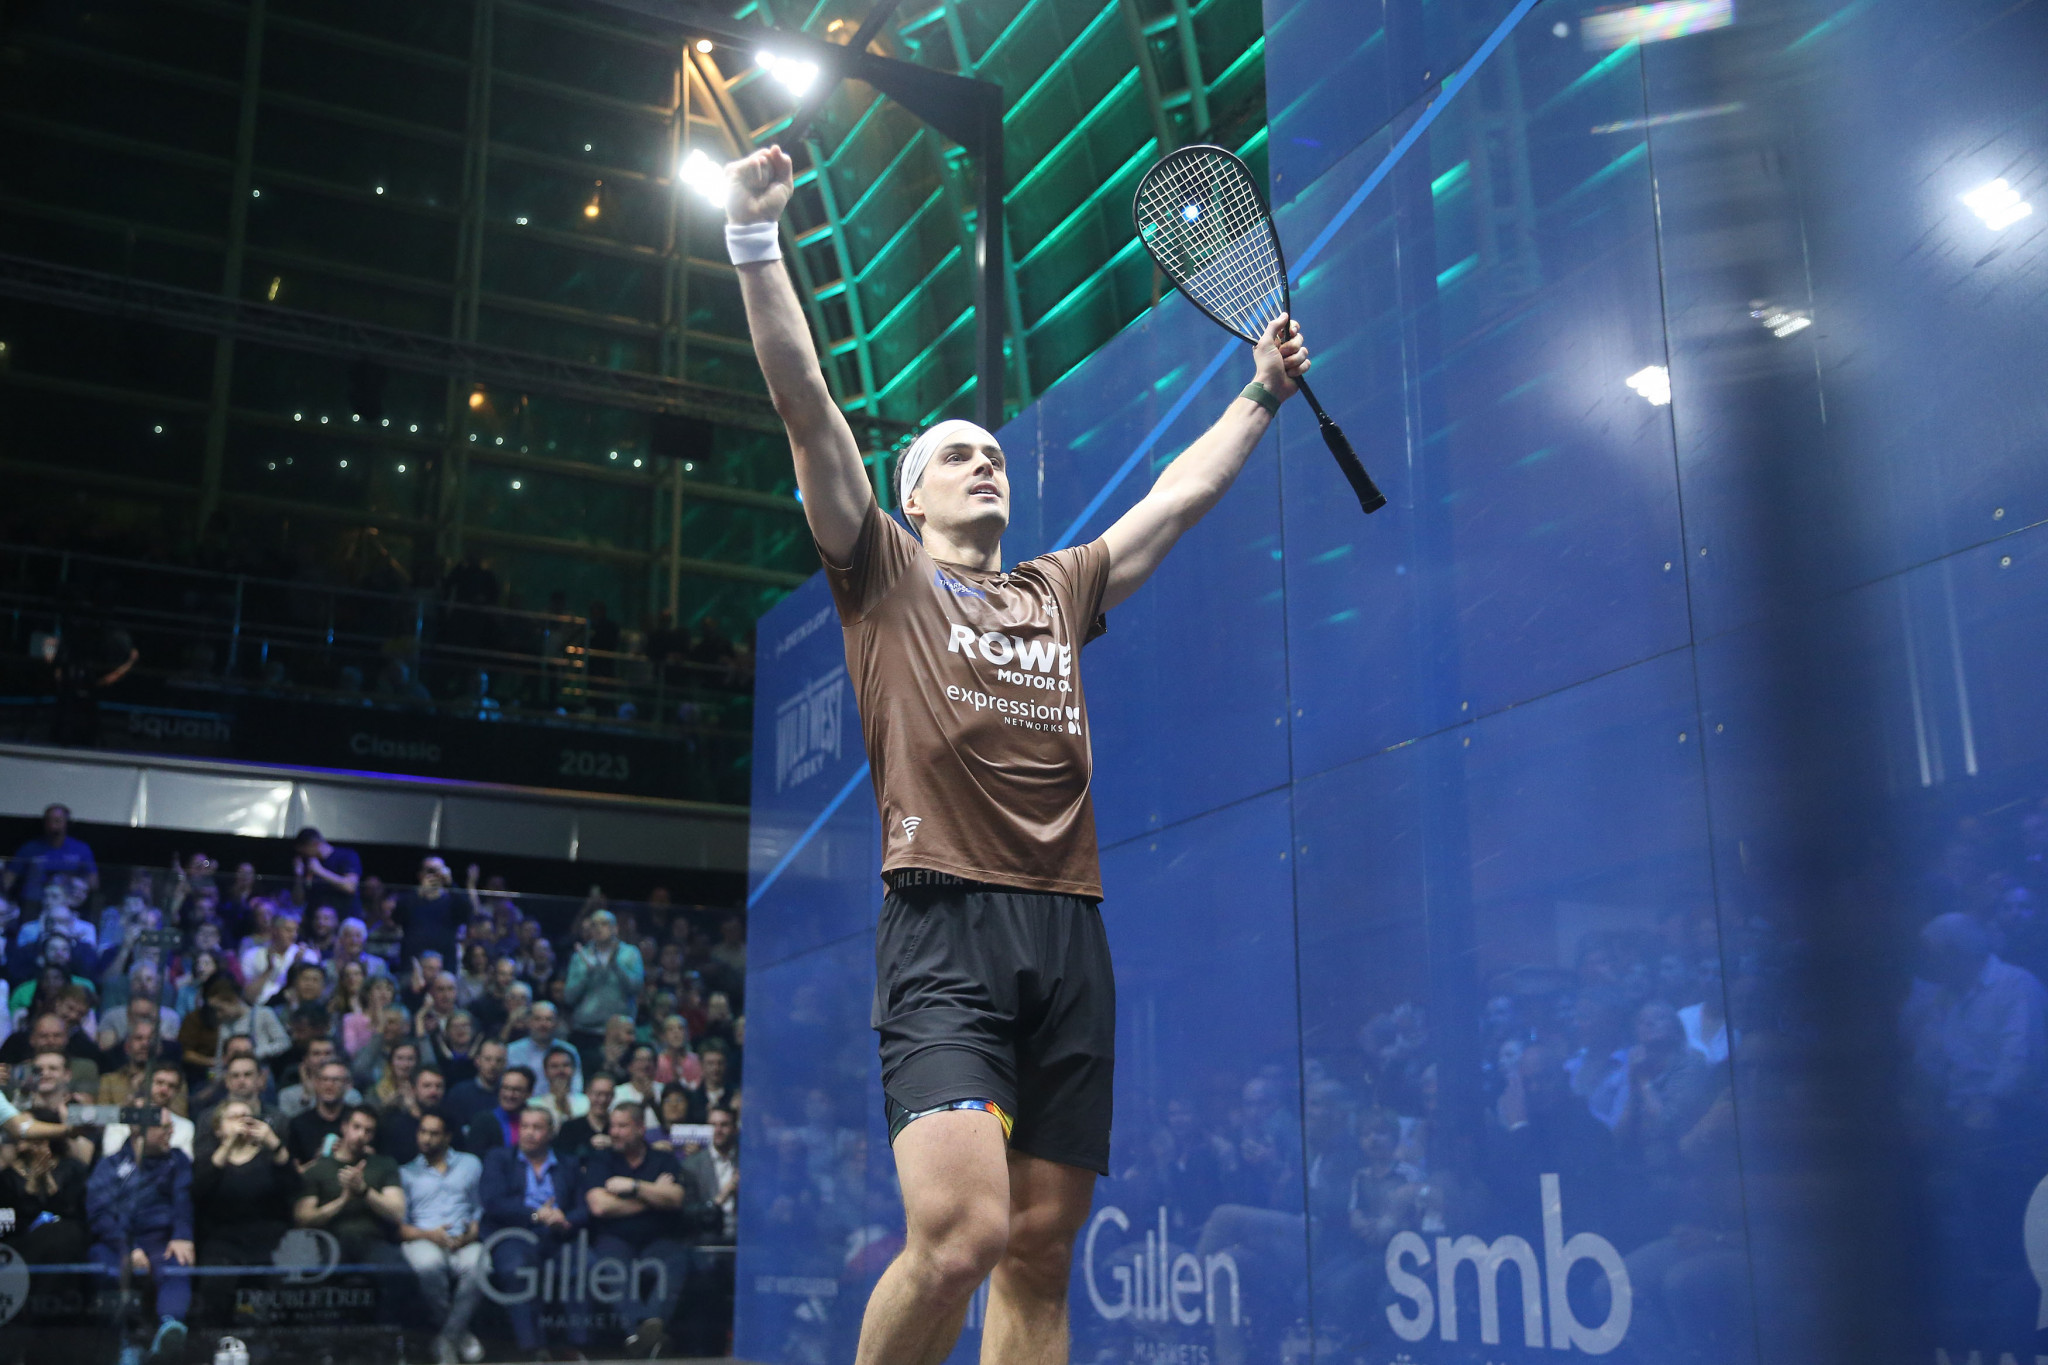 Coll claims PSA Canary Wharf Classic title after coming from behind to beat Makin